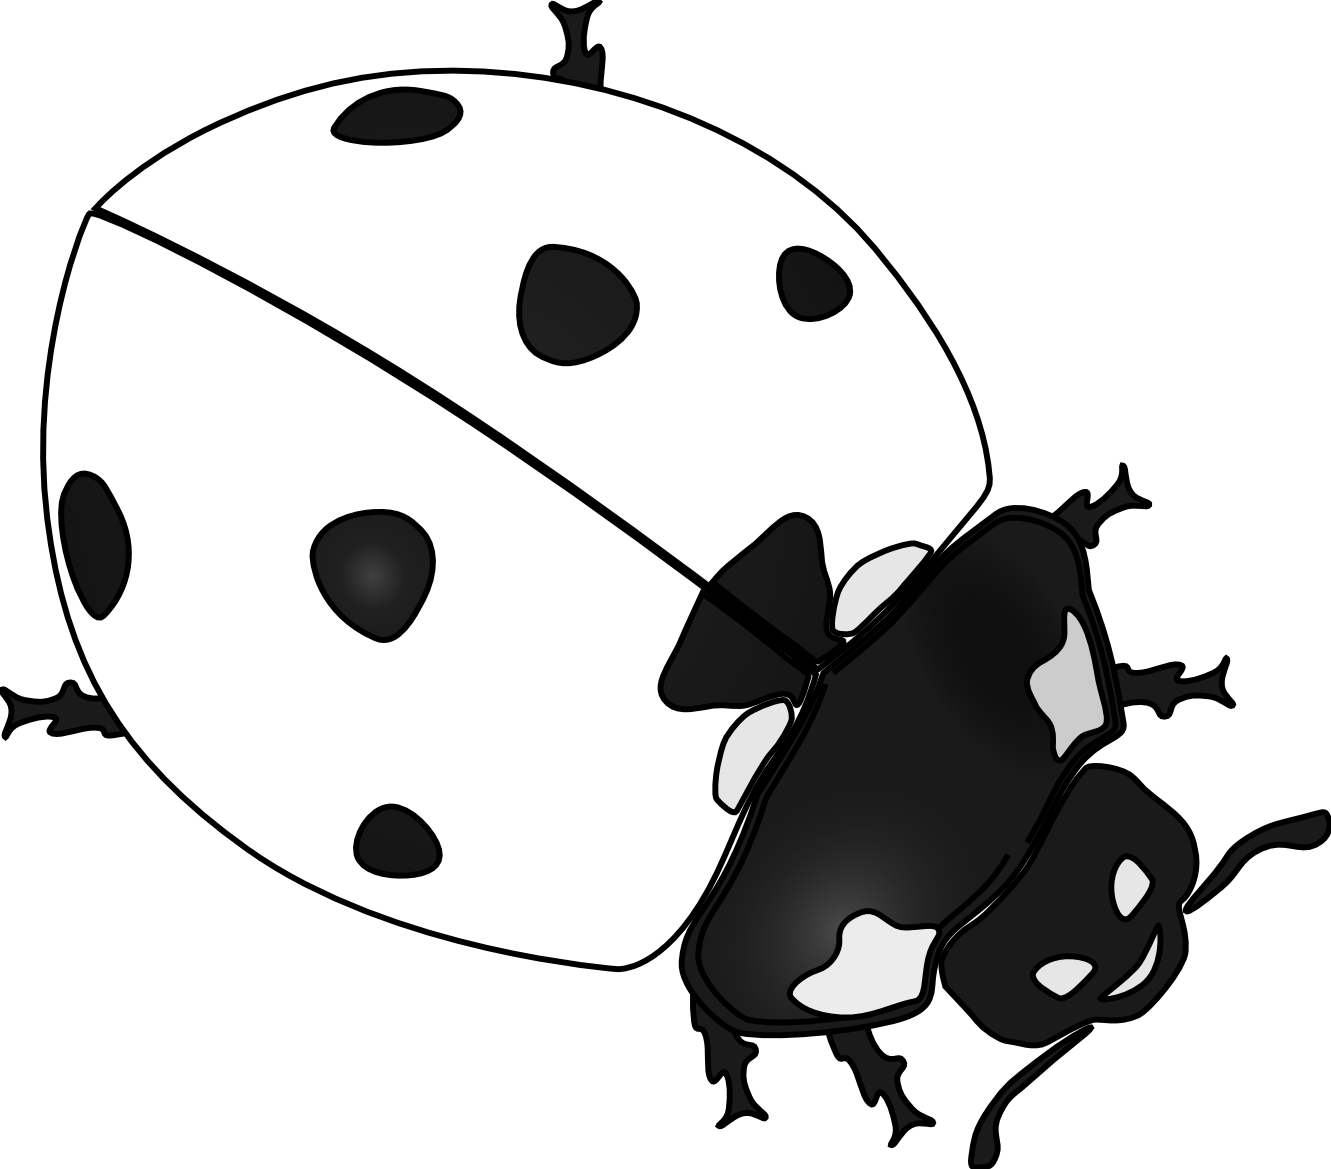 Black And White Ladybug Clipart | Free Download Clip Art | Free ...